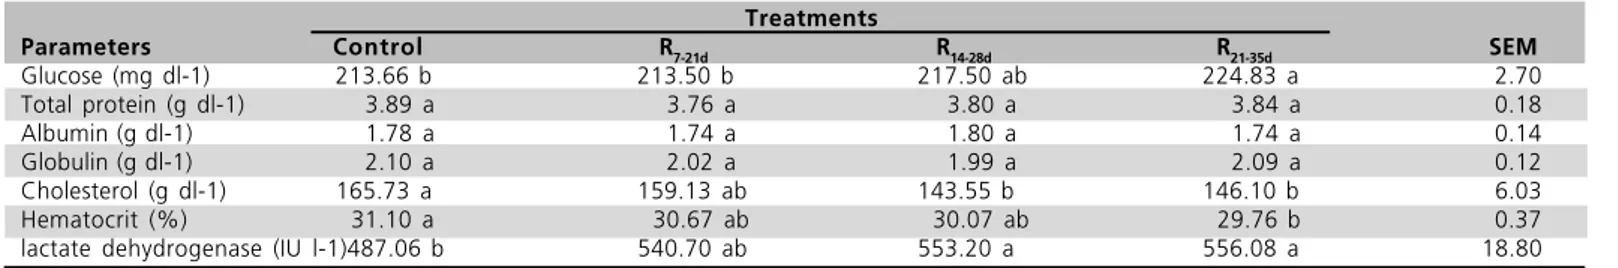 Table 4  - The effect of feed restriction on blood constituentd of broiler chickens at 42 d.